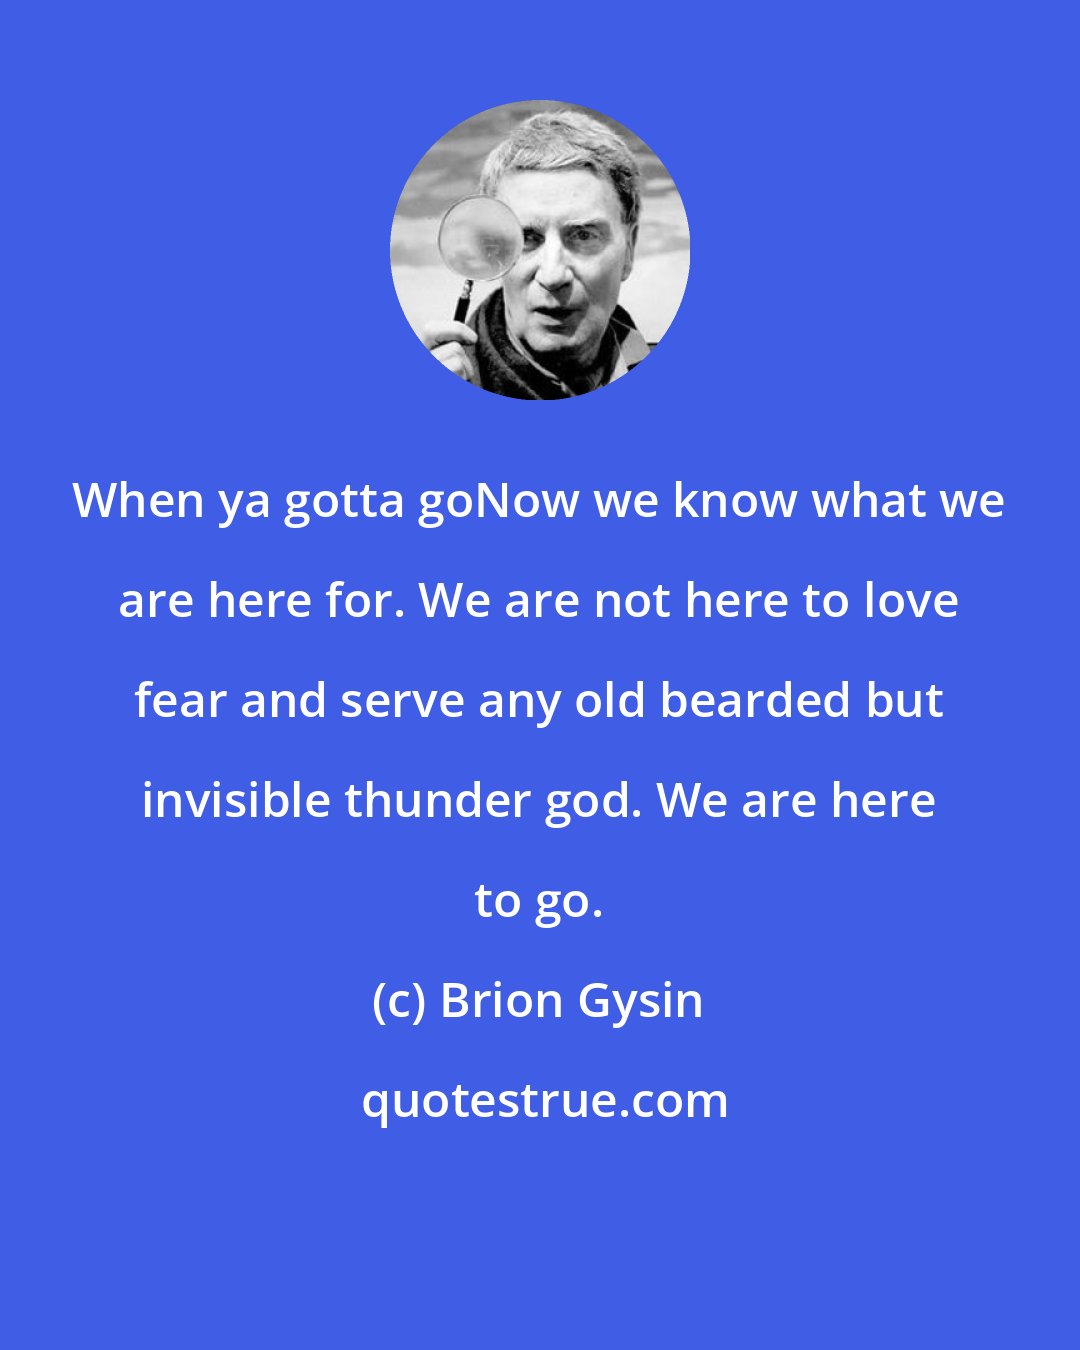 Brion Gysin: When ya gotta goNow we know what we are here for. We are not here to love fear and serve any old bearded but invisible thunder god. We are here to go.